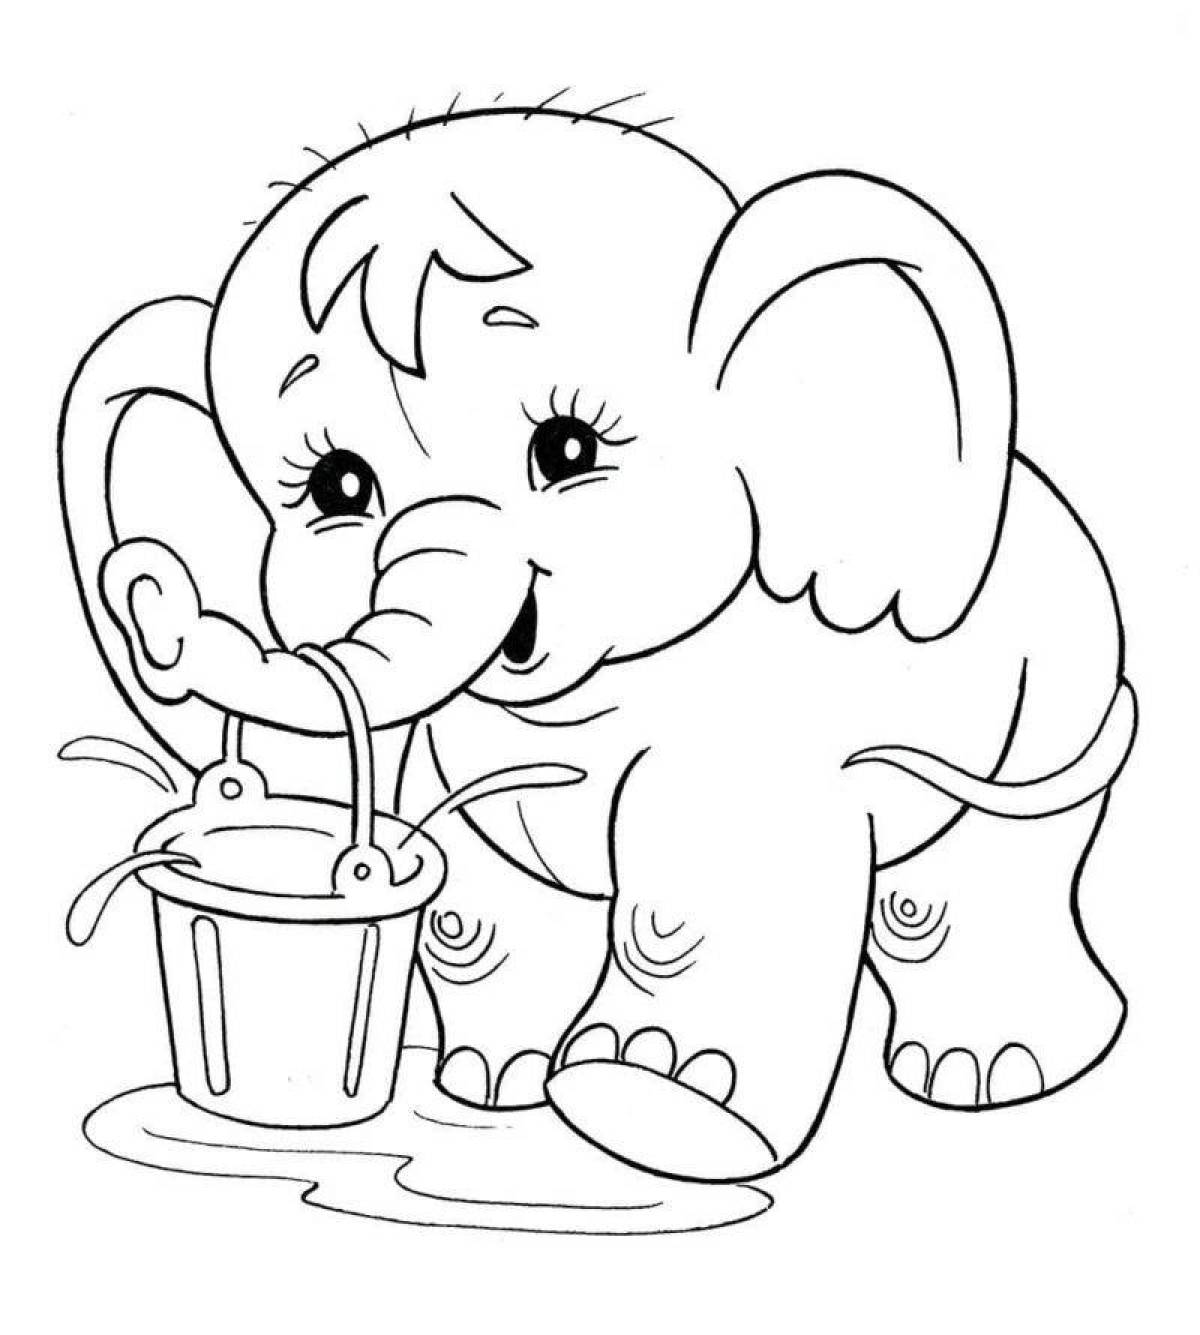 Adorable coloring book for 4 year olds